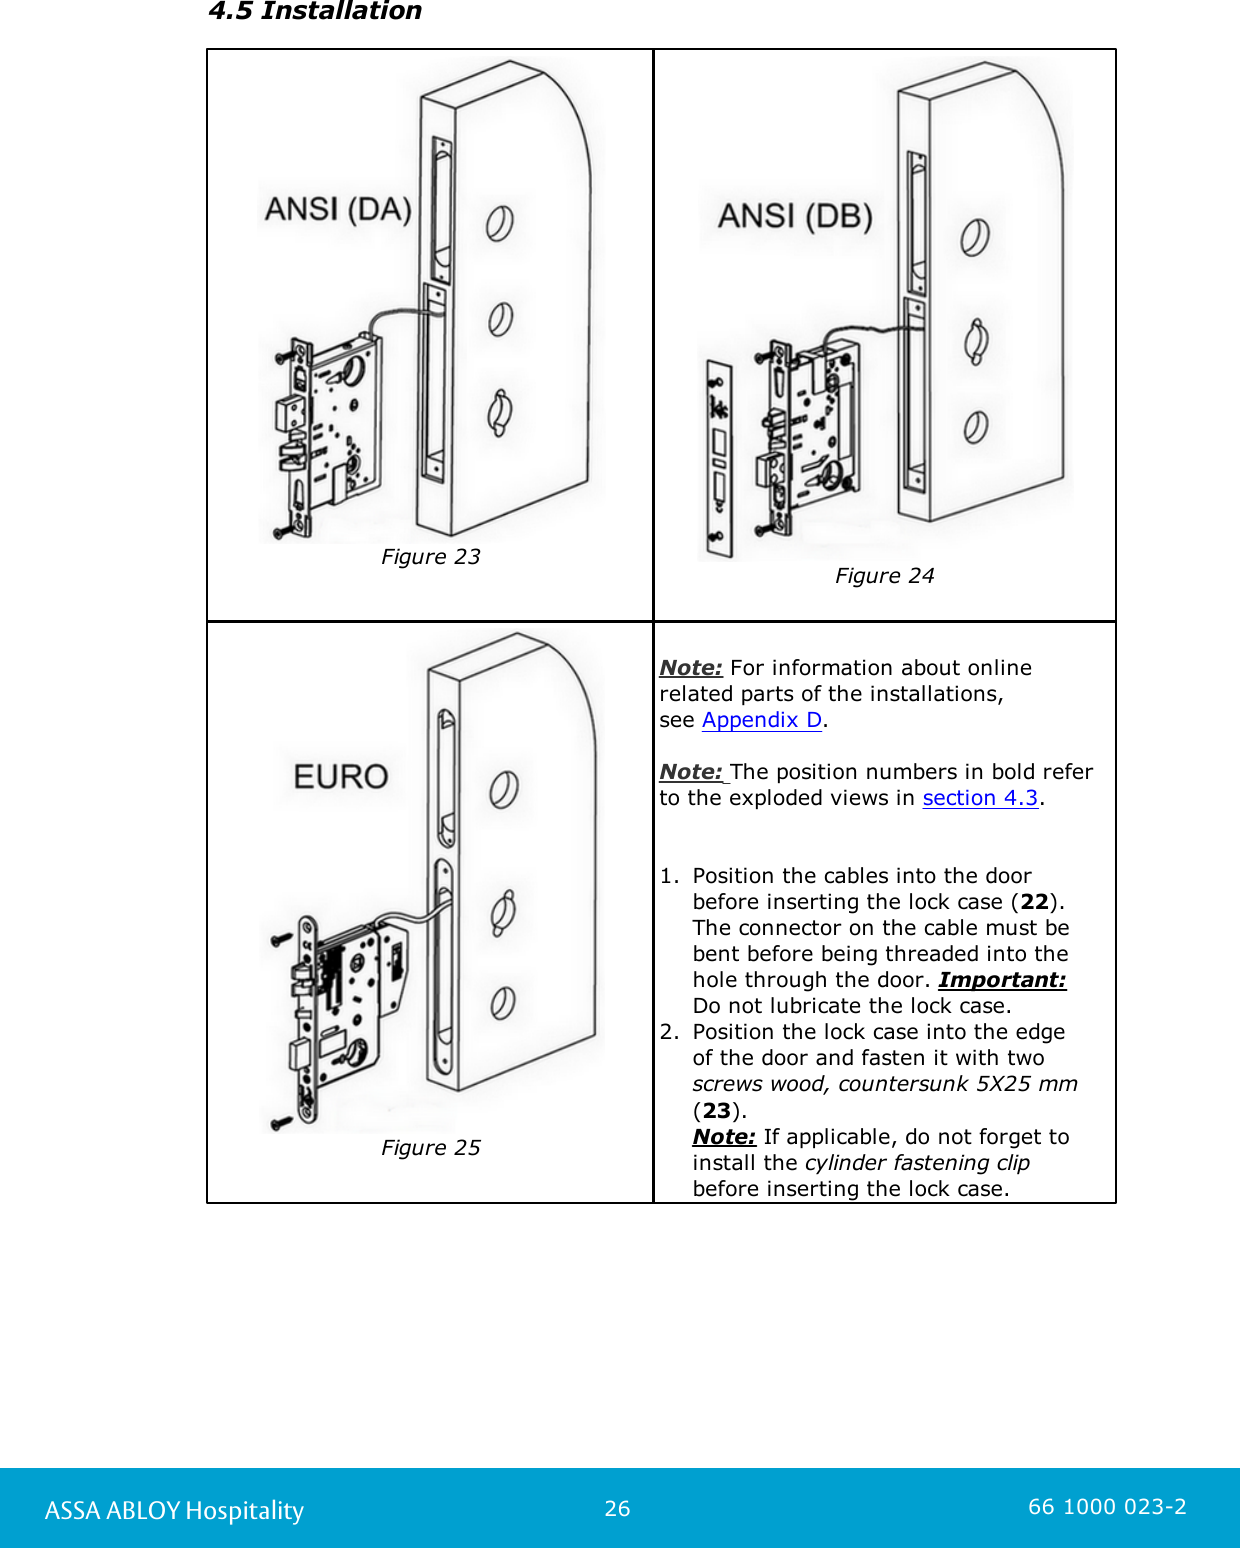 26ASSA ABLOY Hospitality 66 1000 023-24.5 InstallationFigure 23Figure 24Figure 25Note: For information about onlinerelated parts of the installations, see Appendix D.Note: The position numbers in bold referto the exploded views in section 4.3. 1. Position the cables into the door before inserting the lock case (22). The connector on the cable must bebent before being threaded into thehole through the door. Important: Do not lubricate the lock case. 2. Position the lock case into the edge of the door and fasten it with two screws wood, countersunk 5X25 mm(23). Note: If applicable, do not forget toinstall the cylinder fastening clip before inserting the lock case. 